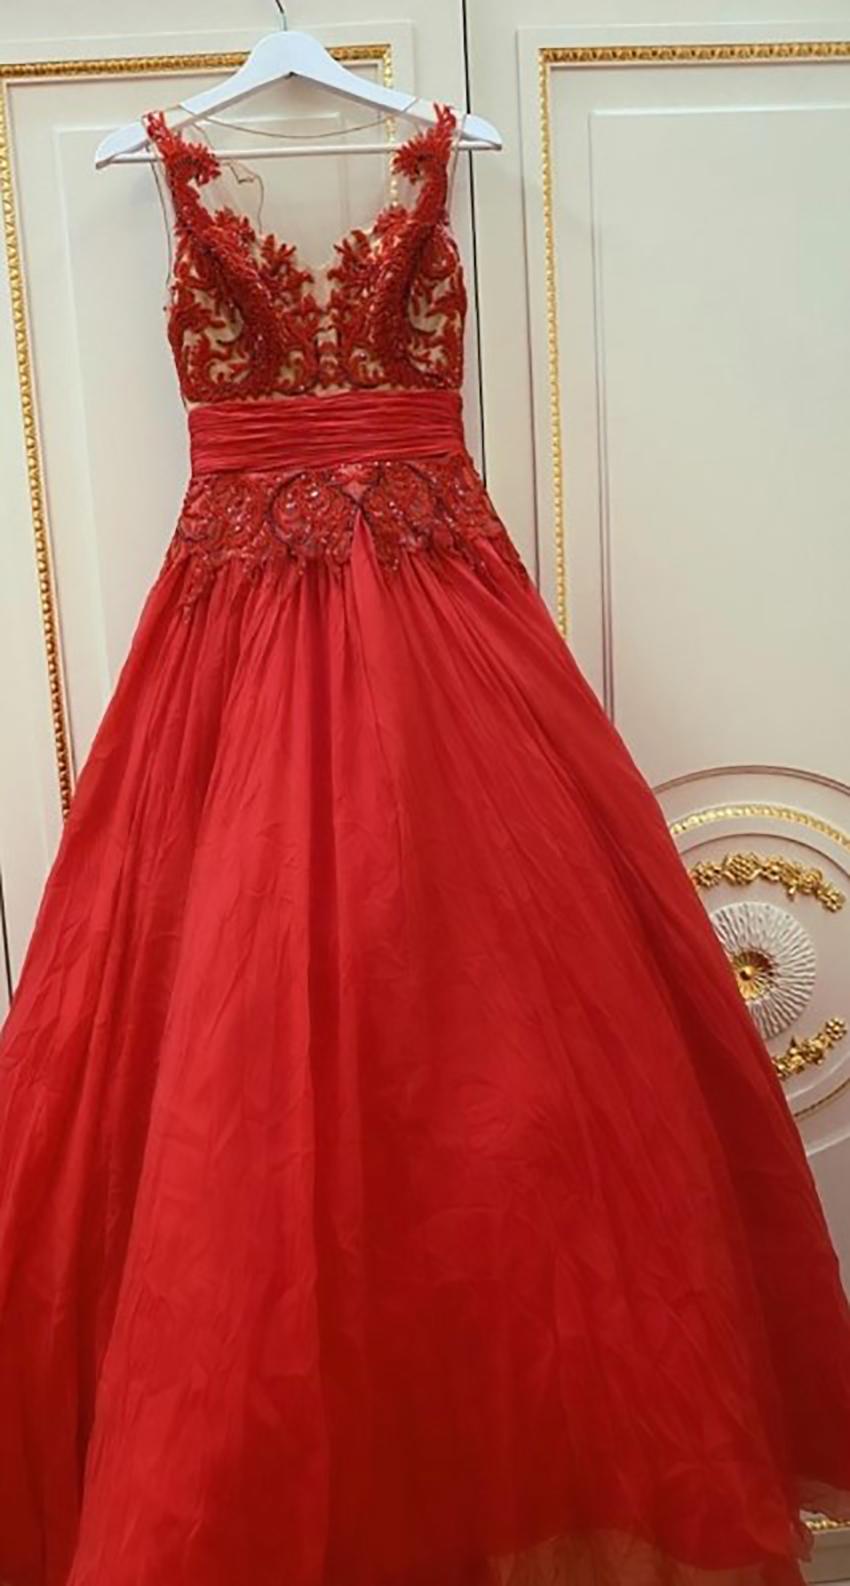 ZUHAIR MURAD

Incredible red embellished corset dress



sleeveless

Will make the waist thin and silhouette prefect! 





Size:  IT 38 - 2



Pre-owned. Excellent condition. 
PLEASE VISIT OUR STORE FOR MORE GREAT ITEMS


os 